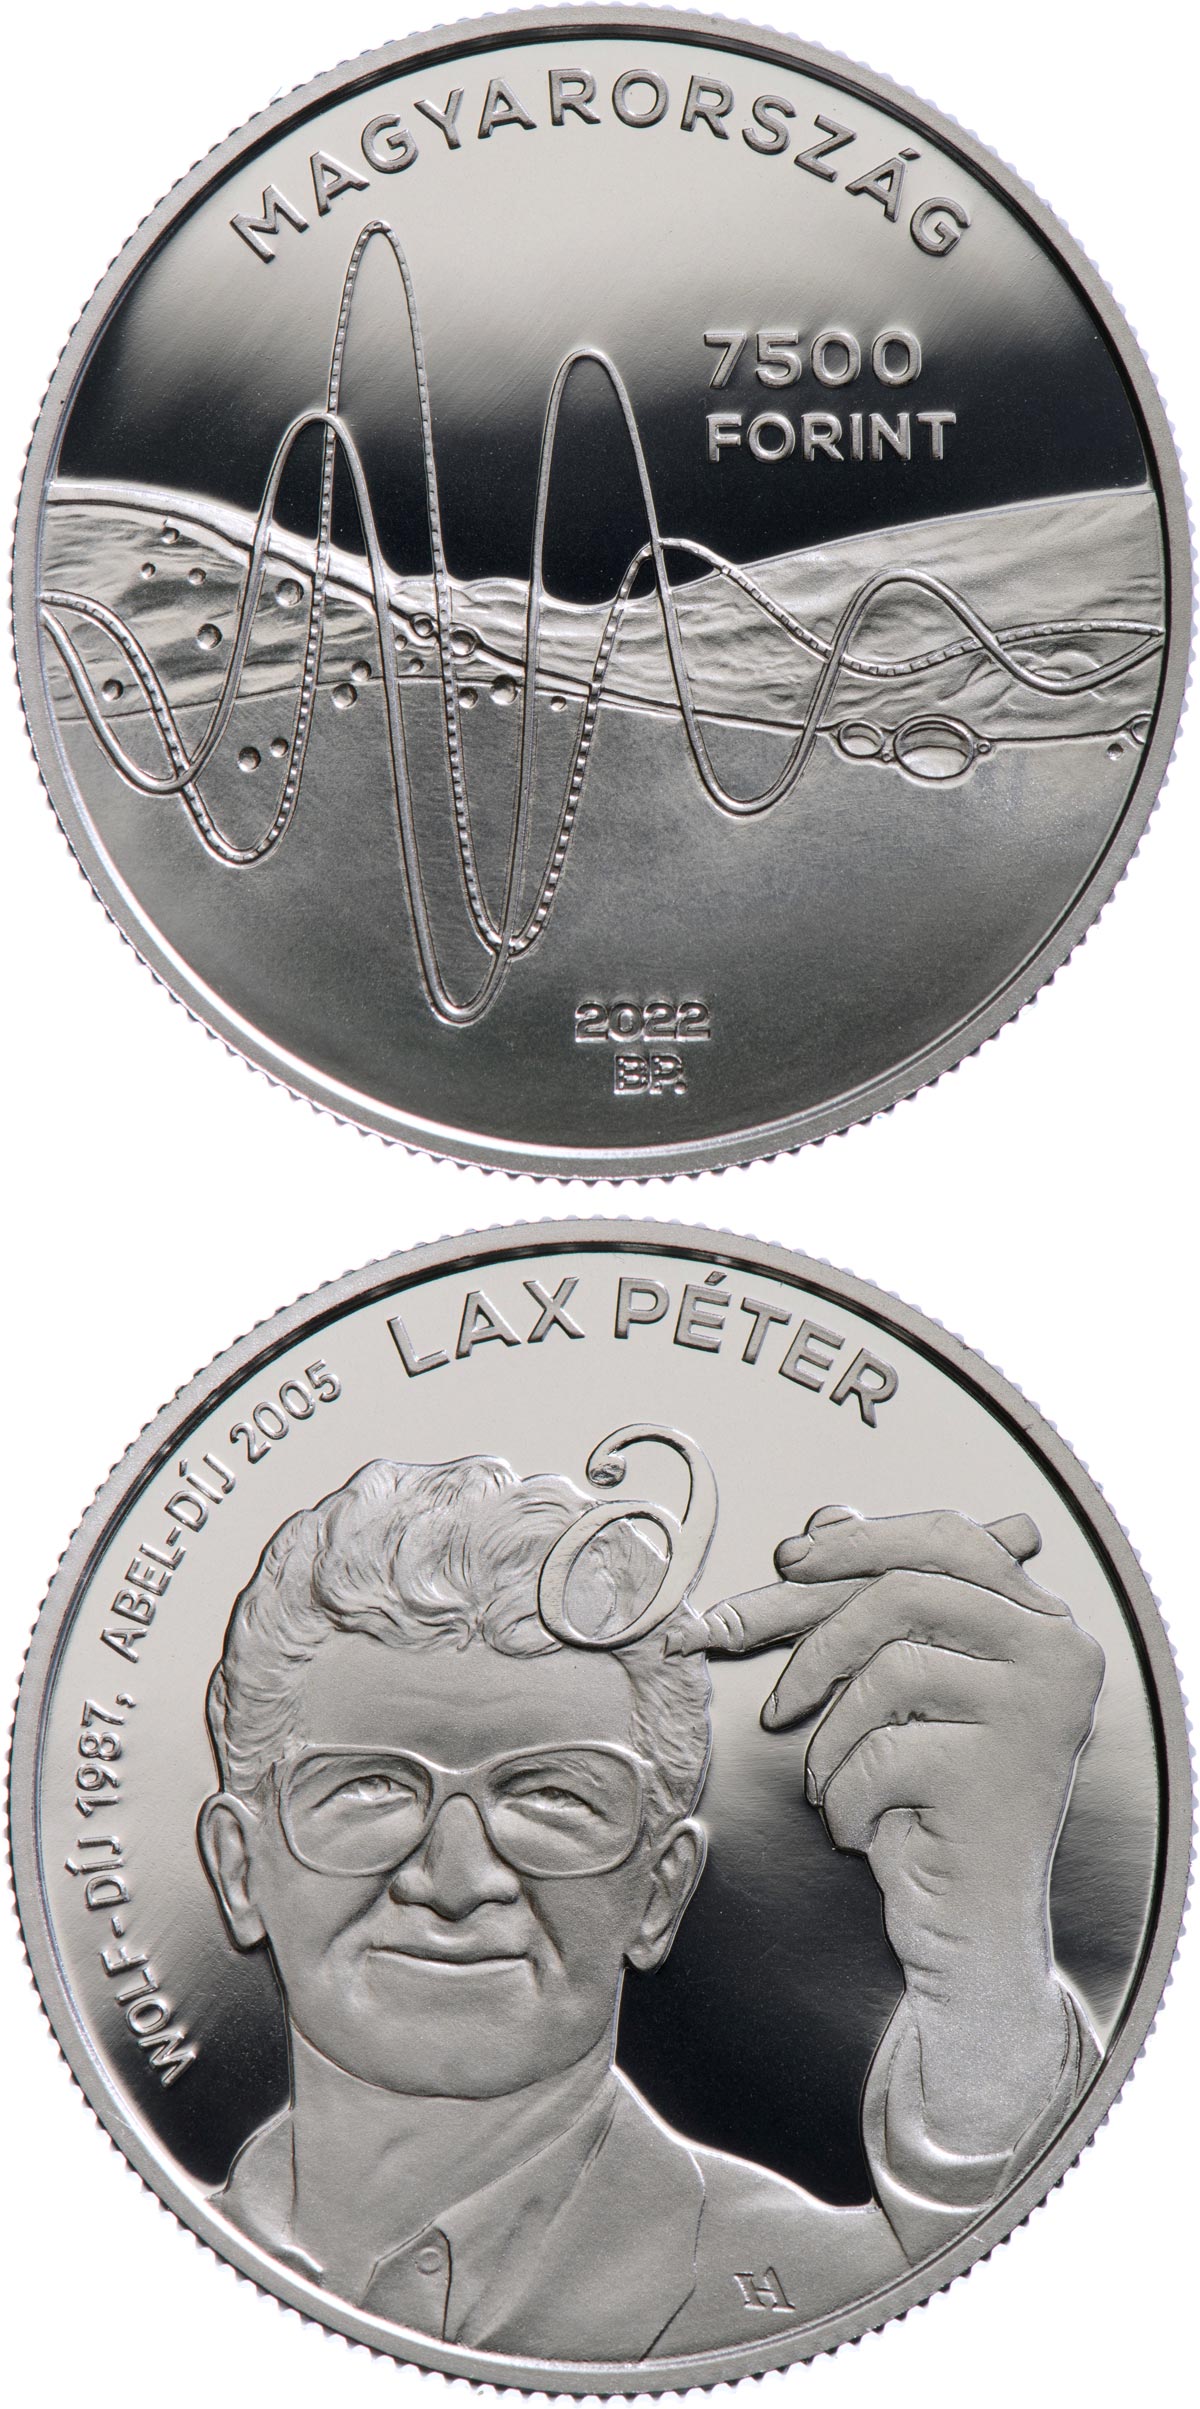 Image of 7500 forint coin - Péter Lax | Hungary 2022.  The Silver coin is of Proof quality.